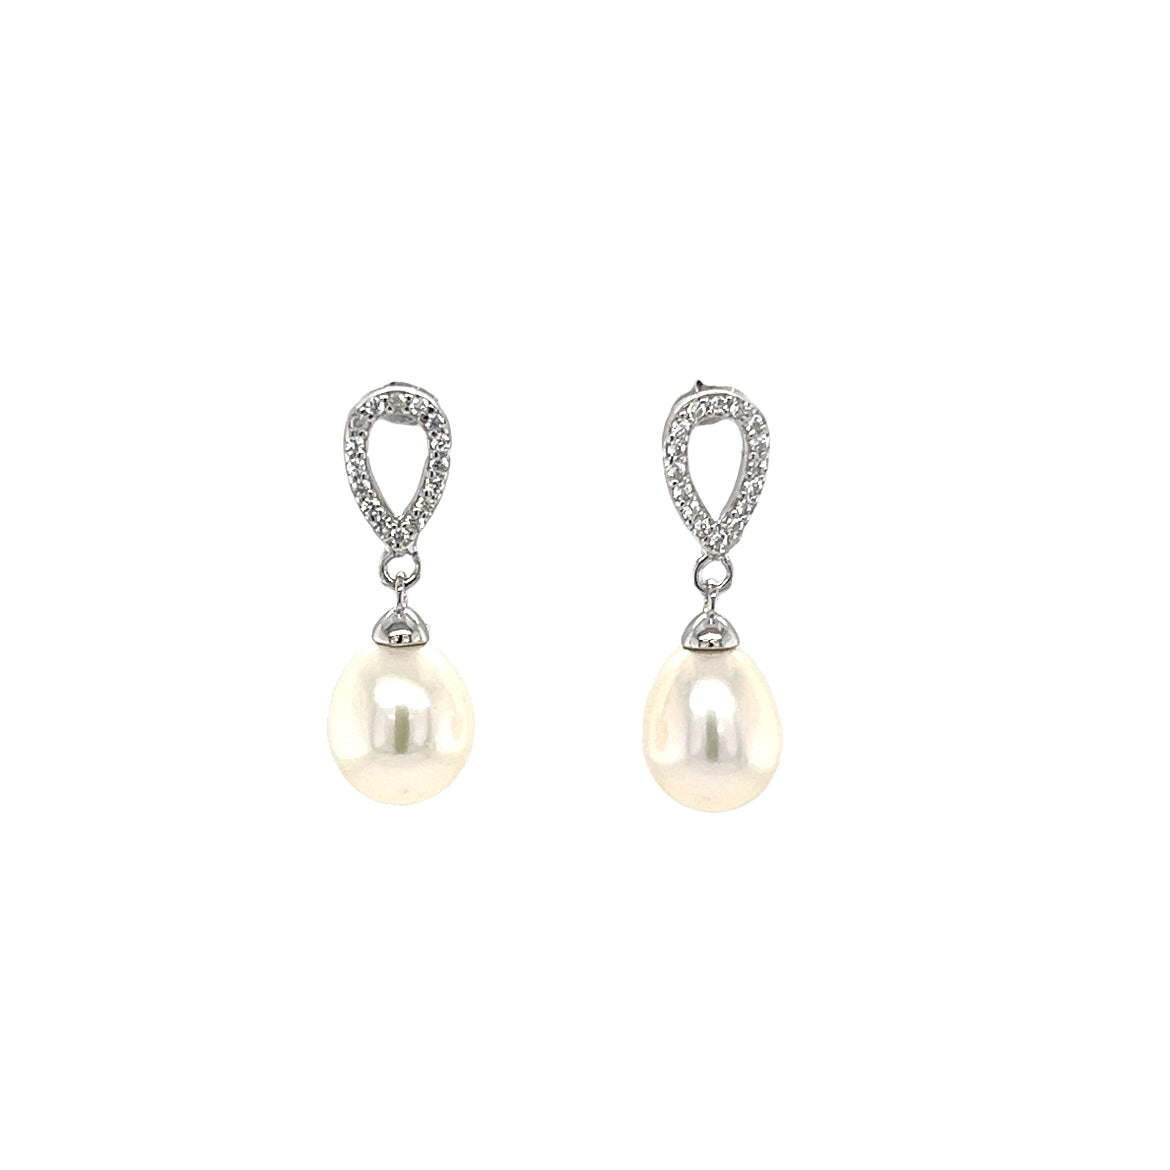 Rice Pearl Dangle Earrings with White Crystals and Sterling Silver Front View